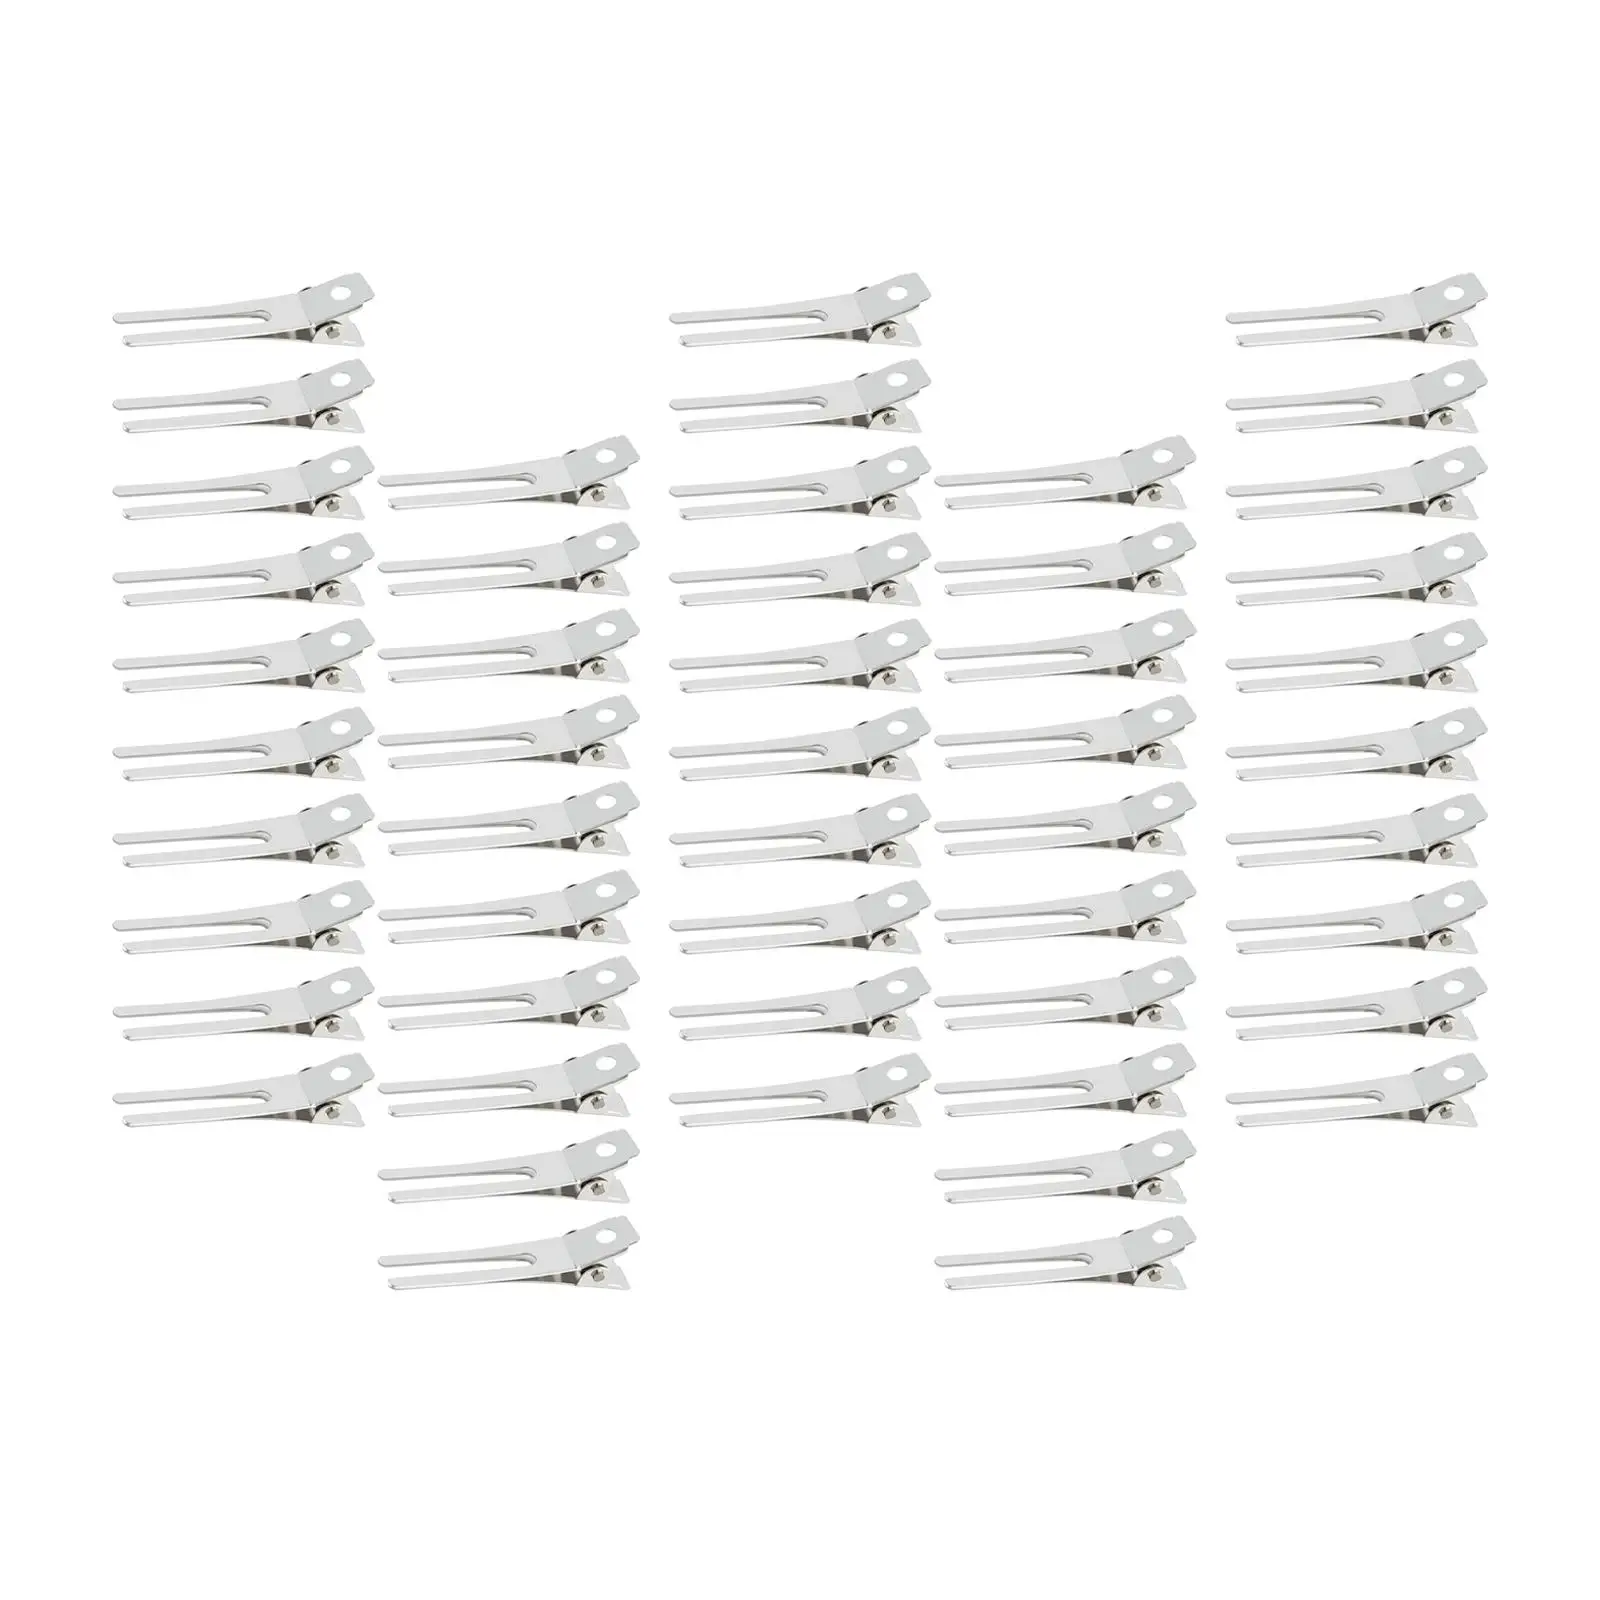 50x Hair Clips Alligator Clips Duckbill Clips Iron Setting Section Double Prong Pins Clips for Extensions Hair Coloring